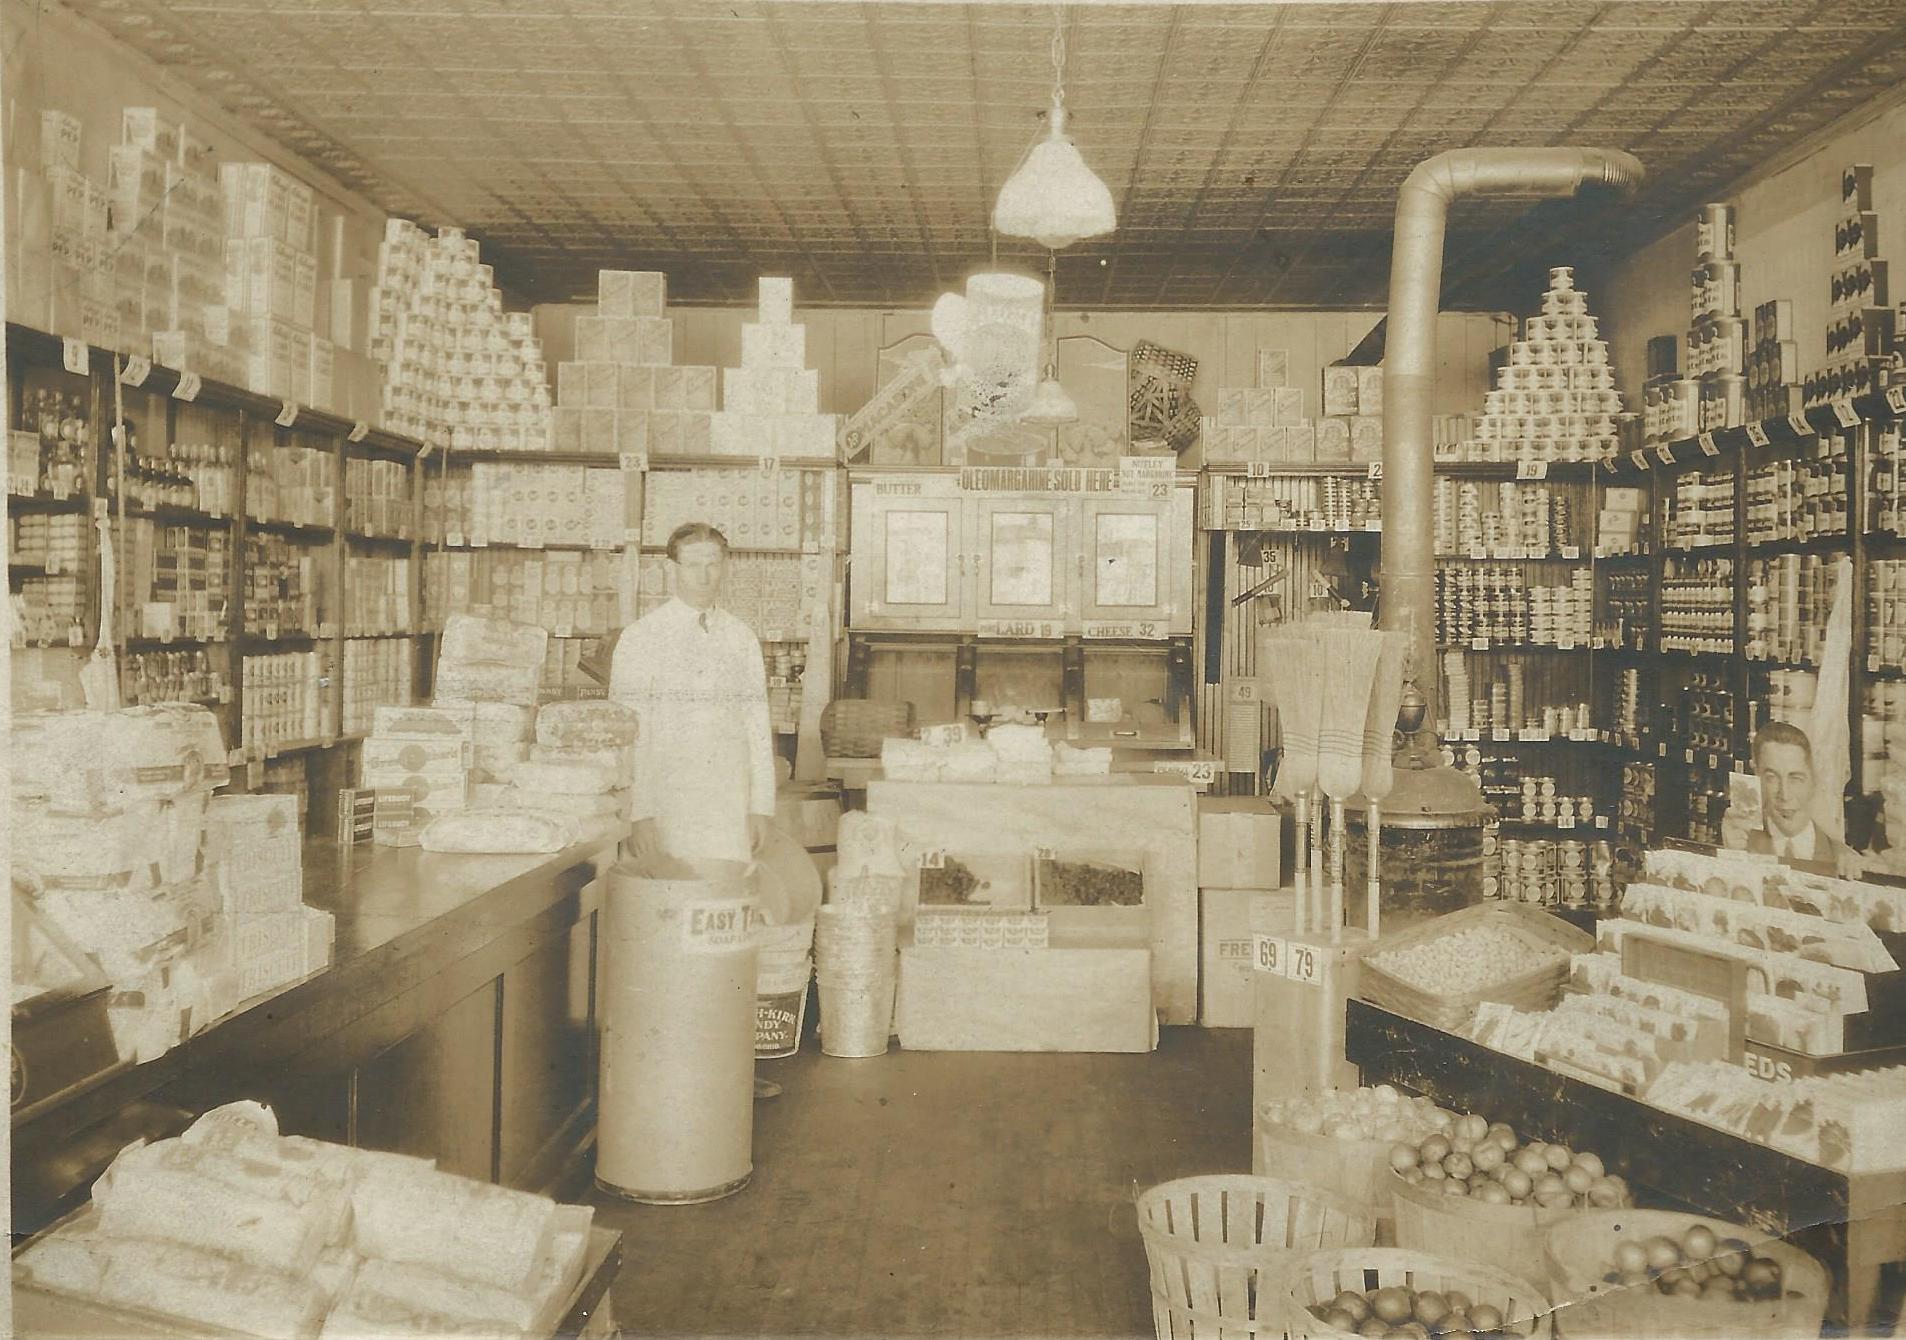 William T. McNitt in his A&P grocery store